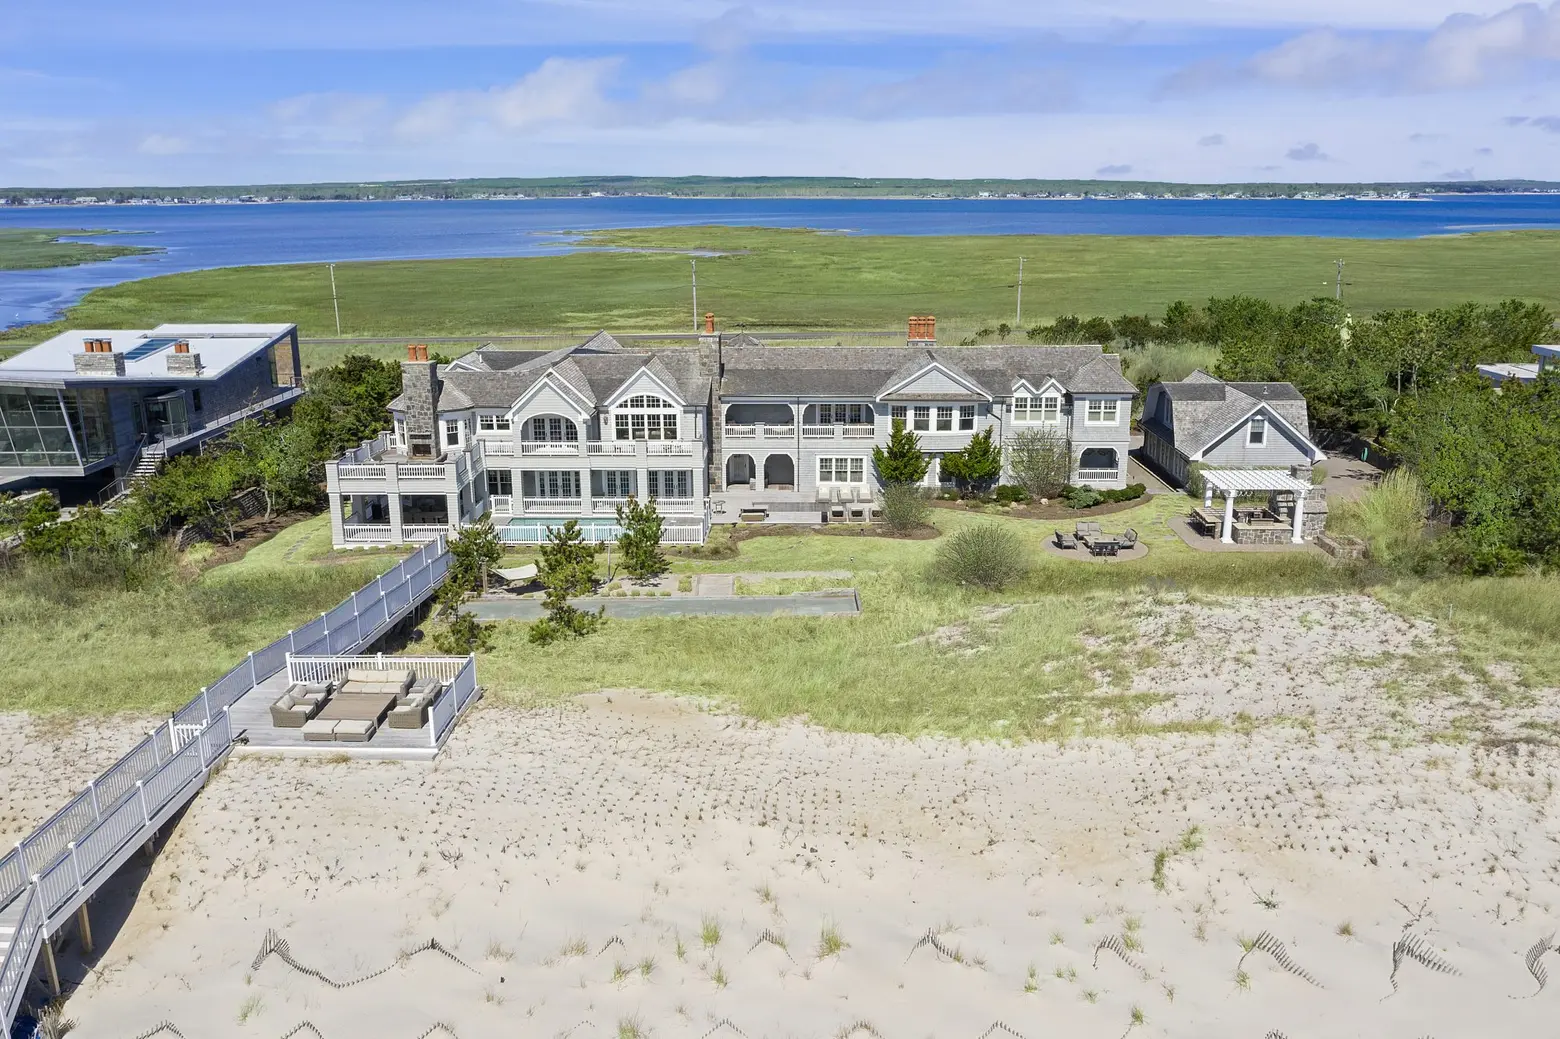 Four-acre Hamptons retreat offers private beach access and a saltwater pool for $14.5M